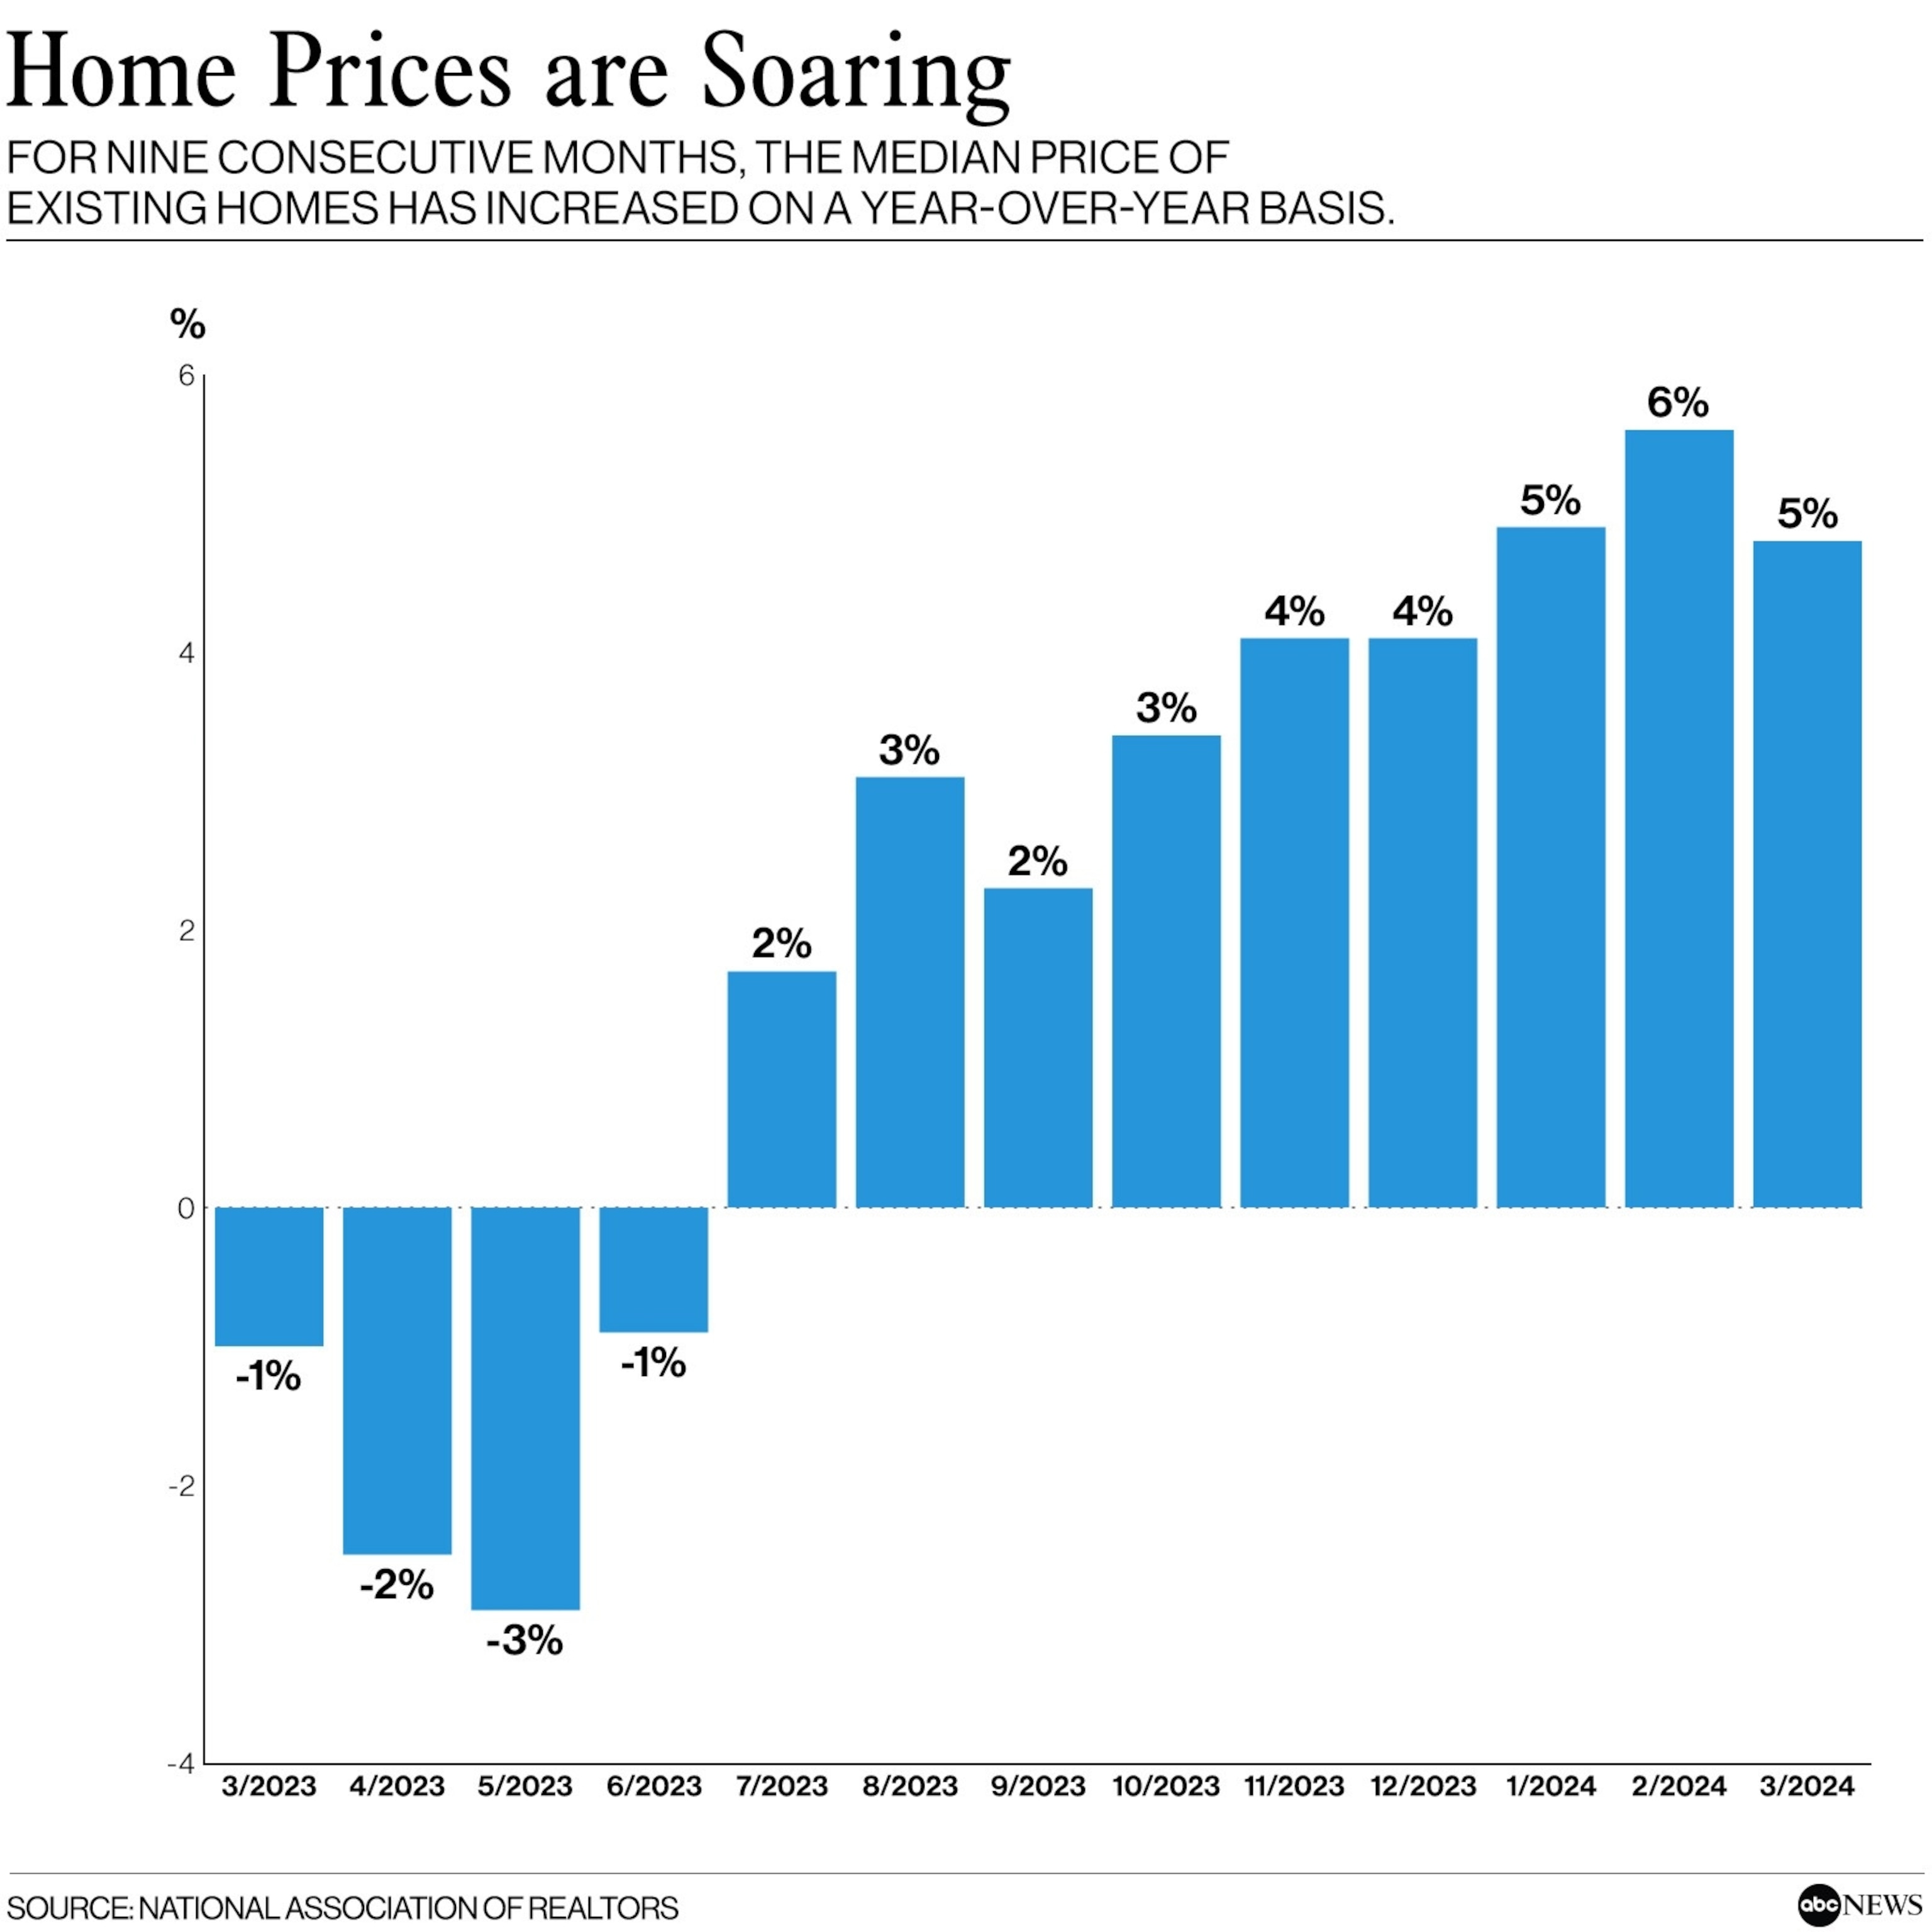 PHOTO: Home Prices are Soaring